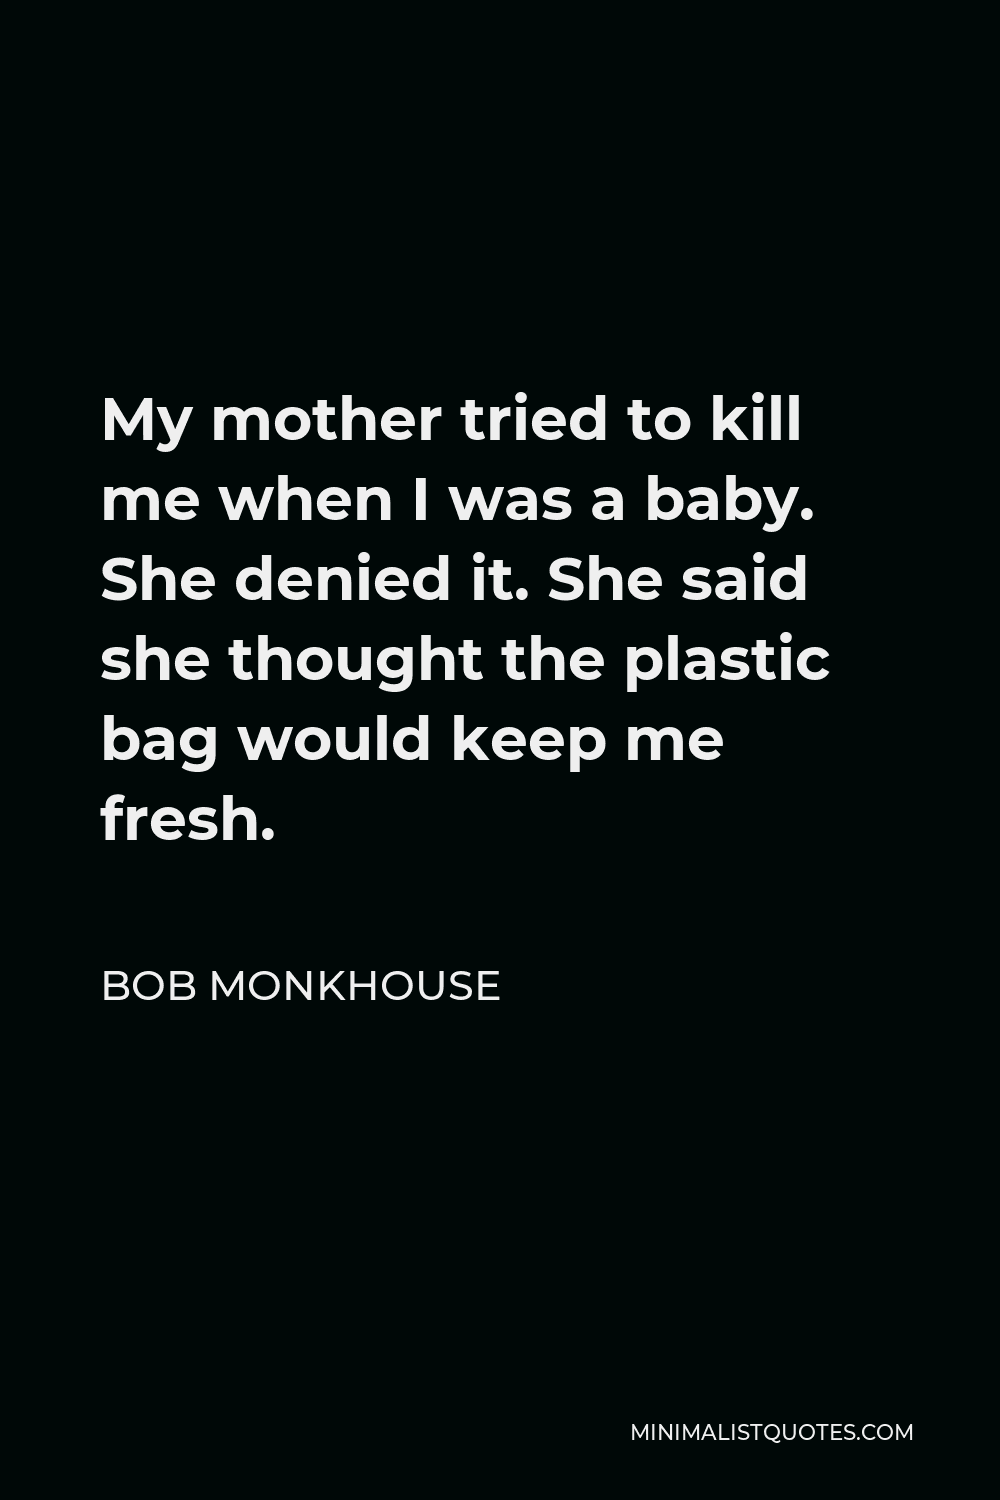 Bob Monkhouse Quote - My mother tried to kill me when I was a baby. She denied it. She said she thought the plastic bag would keep me fresh.